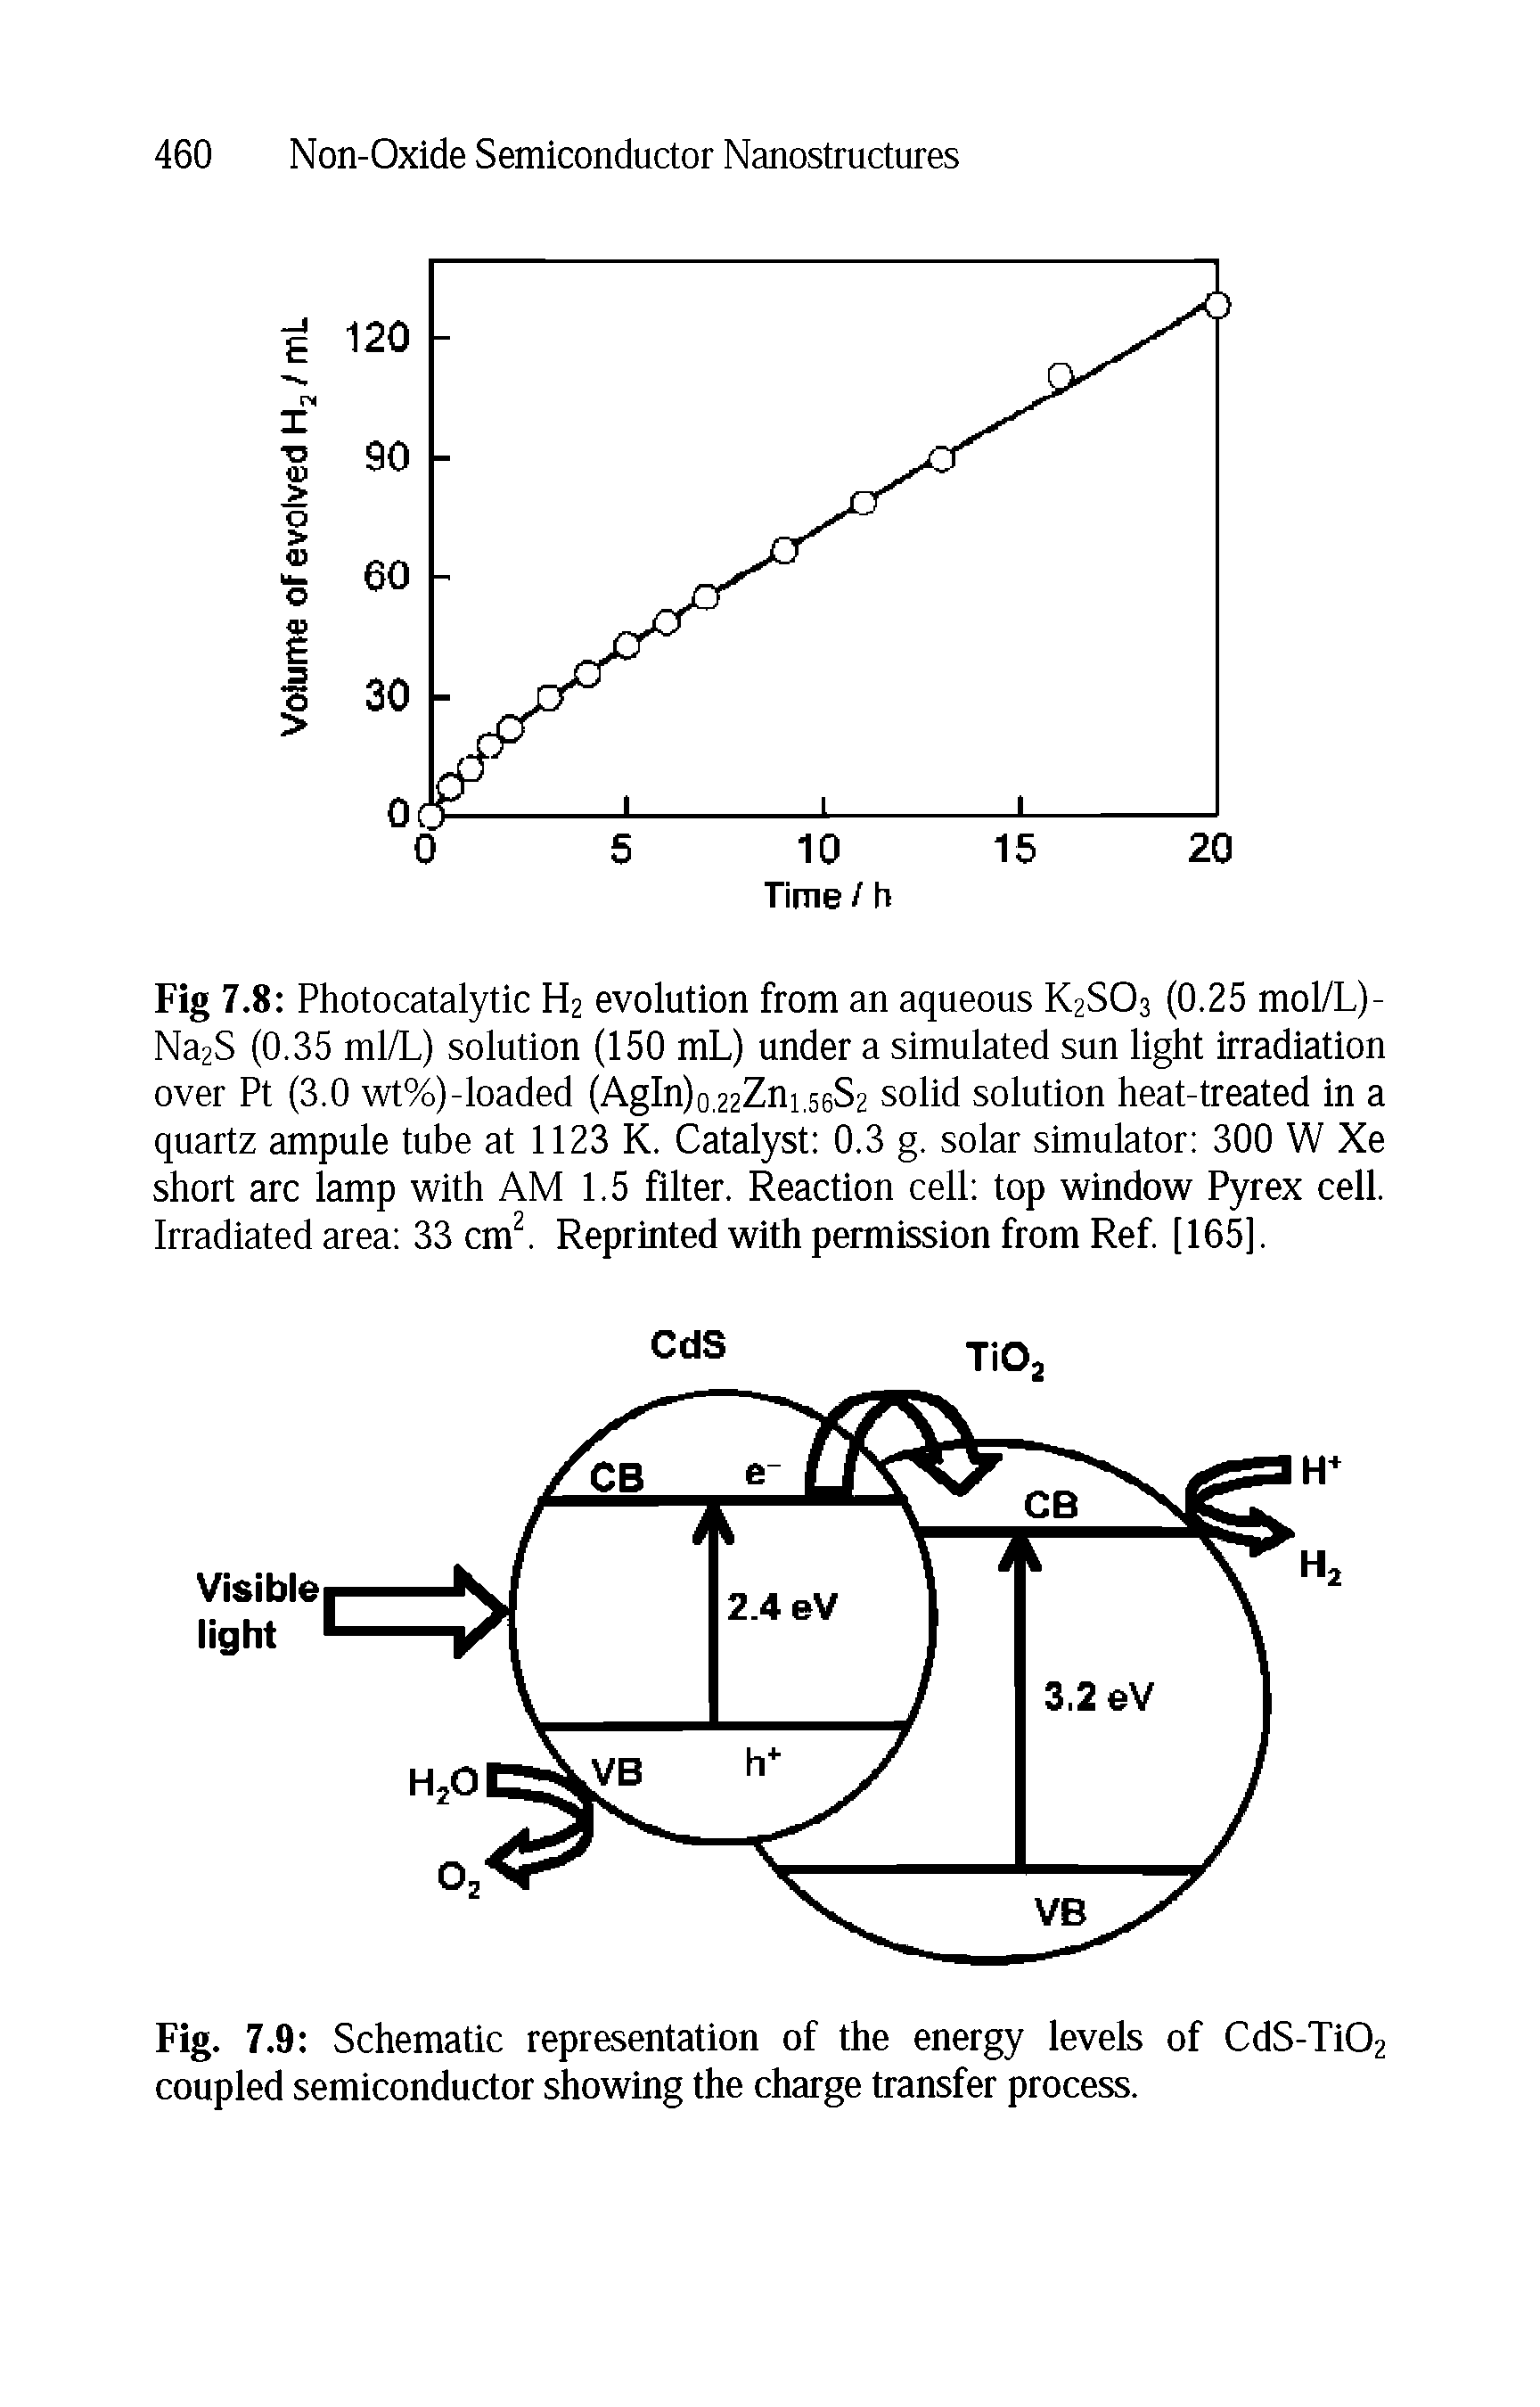 Fig. 7.9 Schematic representation of the energy levels of CdS-Ti02 coupled semiconductor showing the charge transfer process.